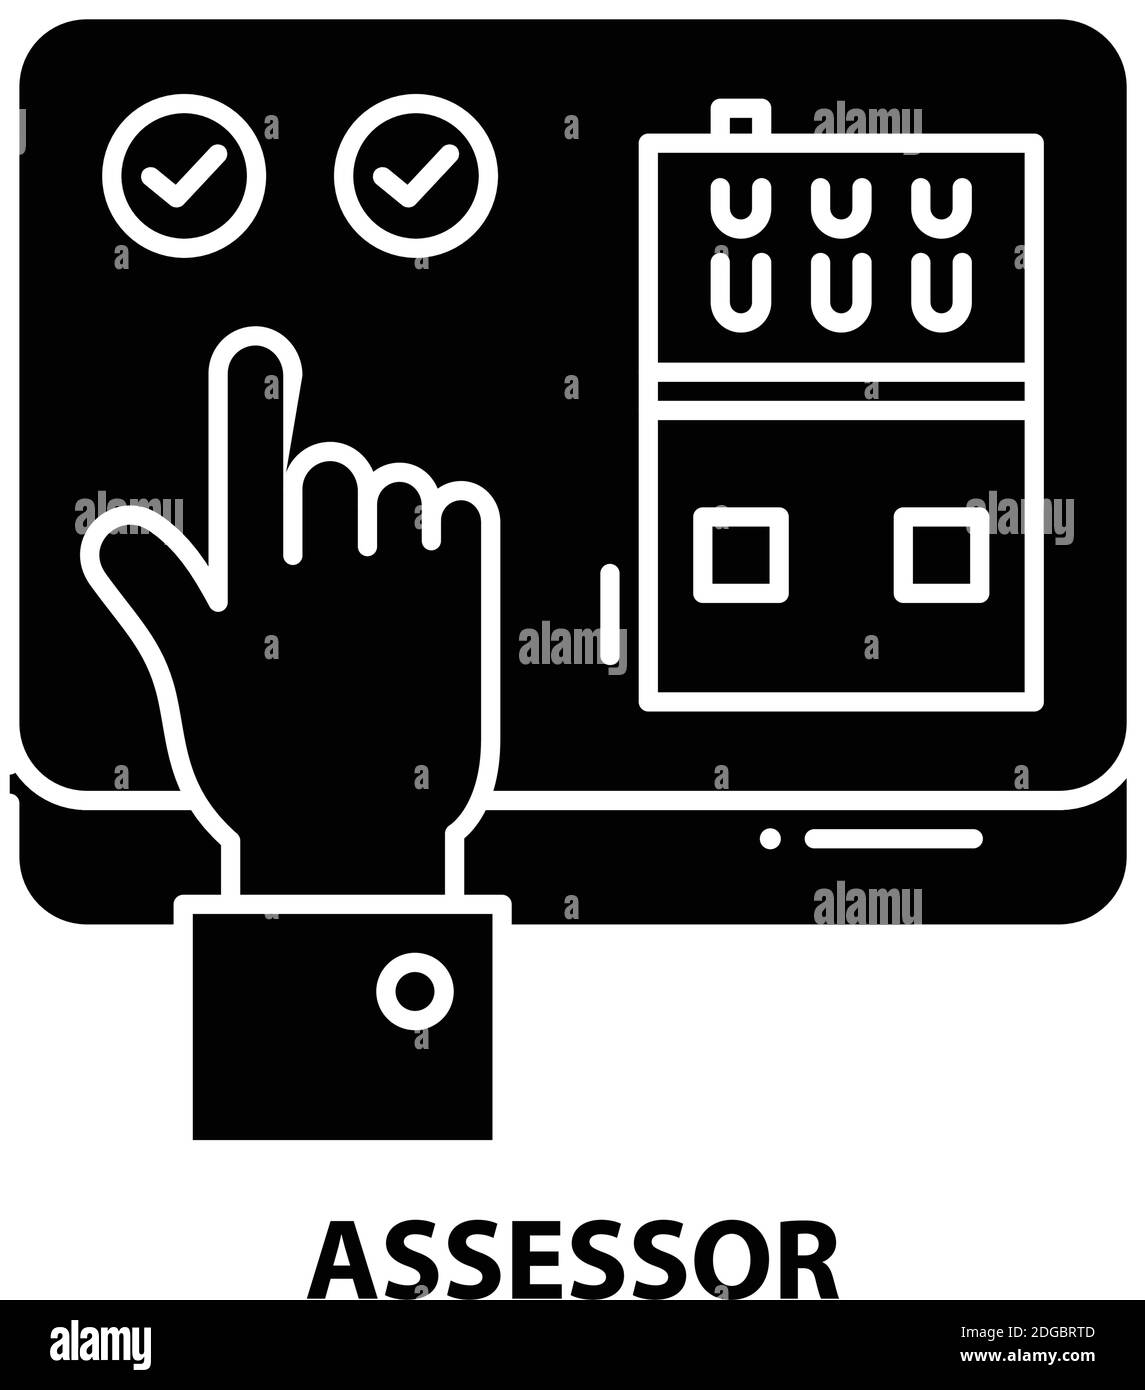 assessor icon, black vector sign with editable strokes, concept illustration Stock Vector